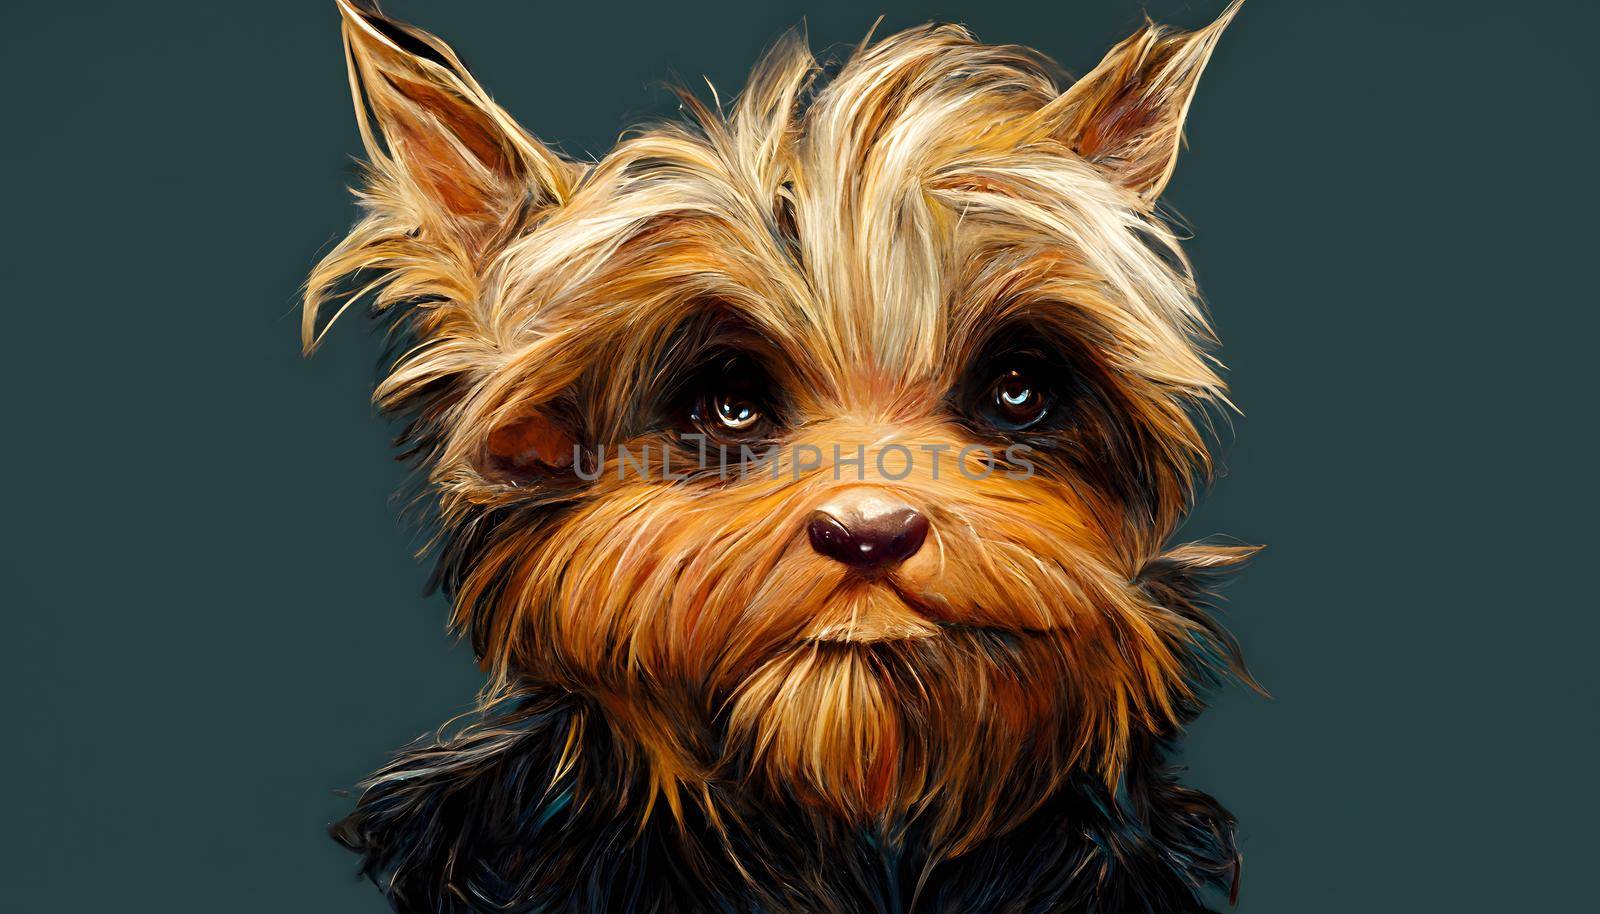 portrait of yorkshire terrier, neural network generated art. Digitally generated image. Not based on any actual scene or pattern.